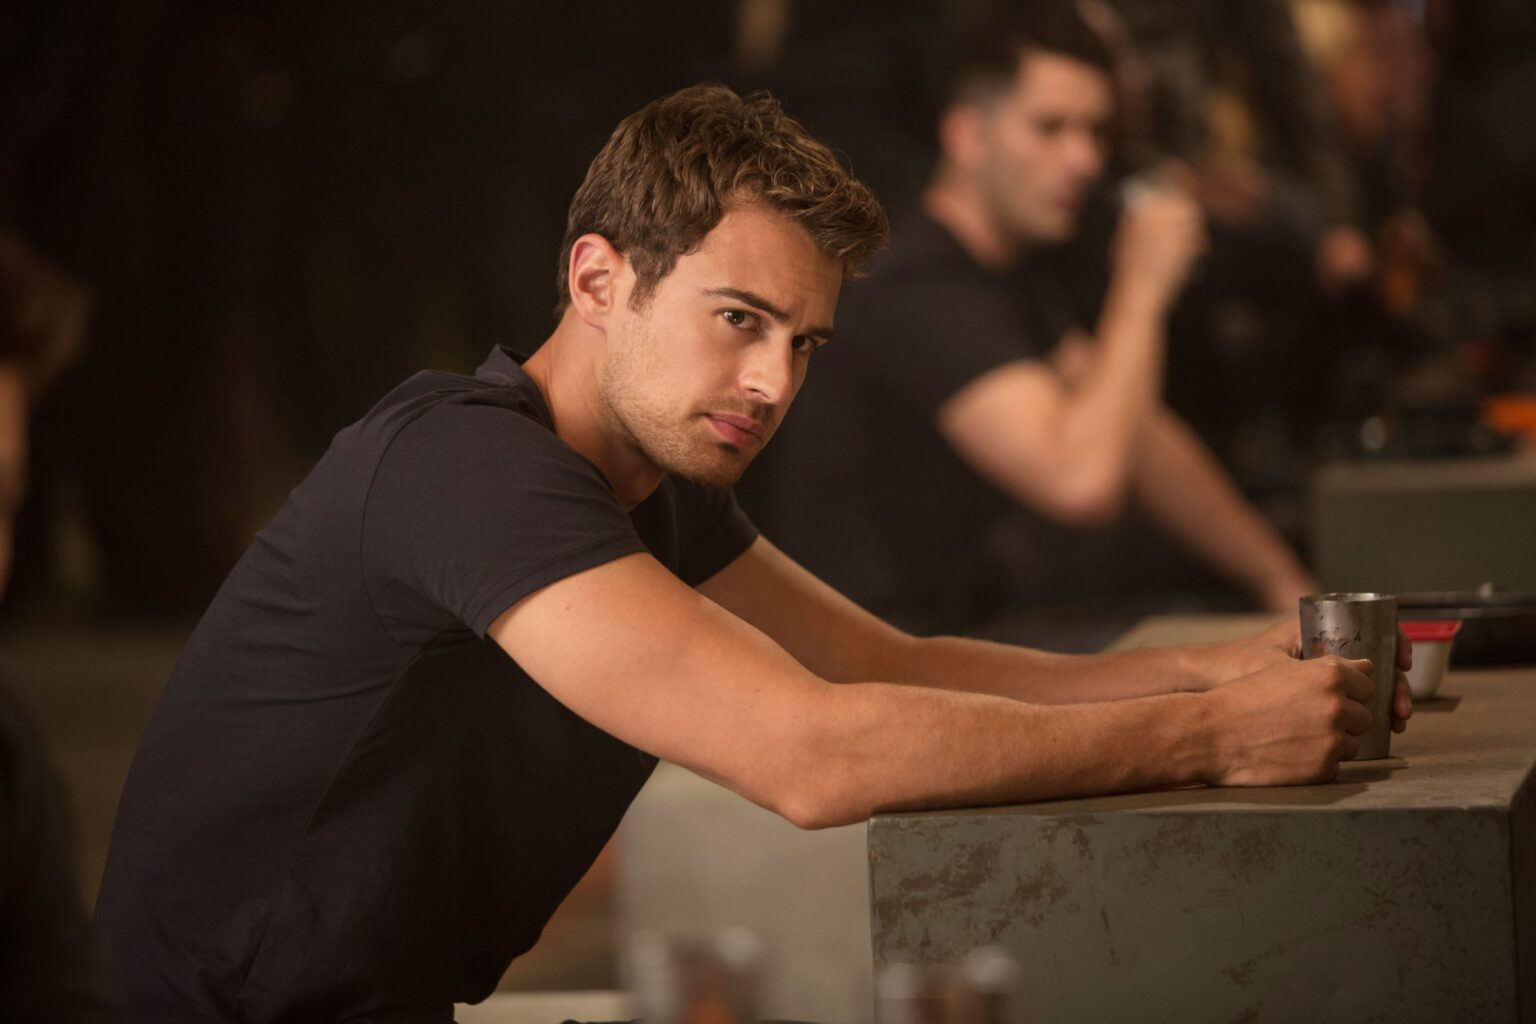 This article contains Theo James in various states of undress for research purposes only. Not at all to oggle over his hot bod.